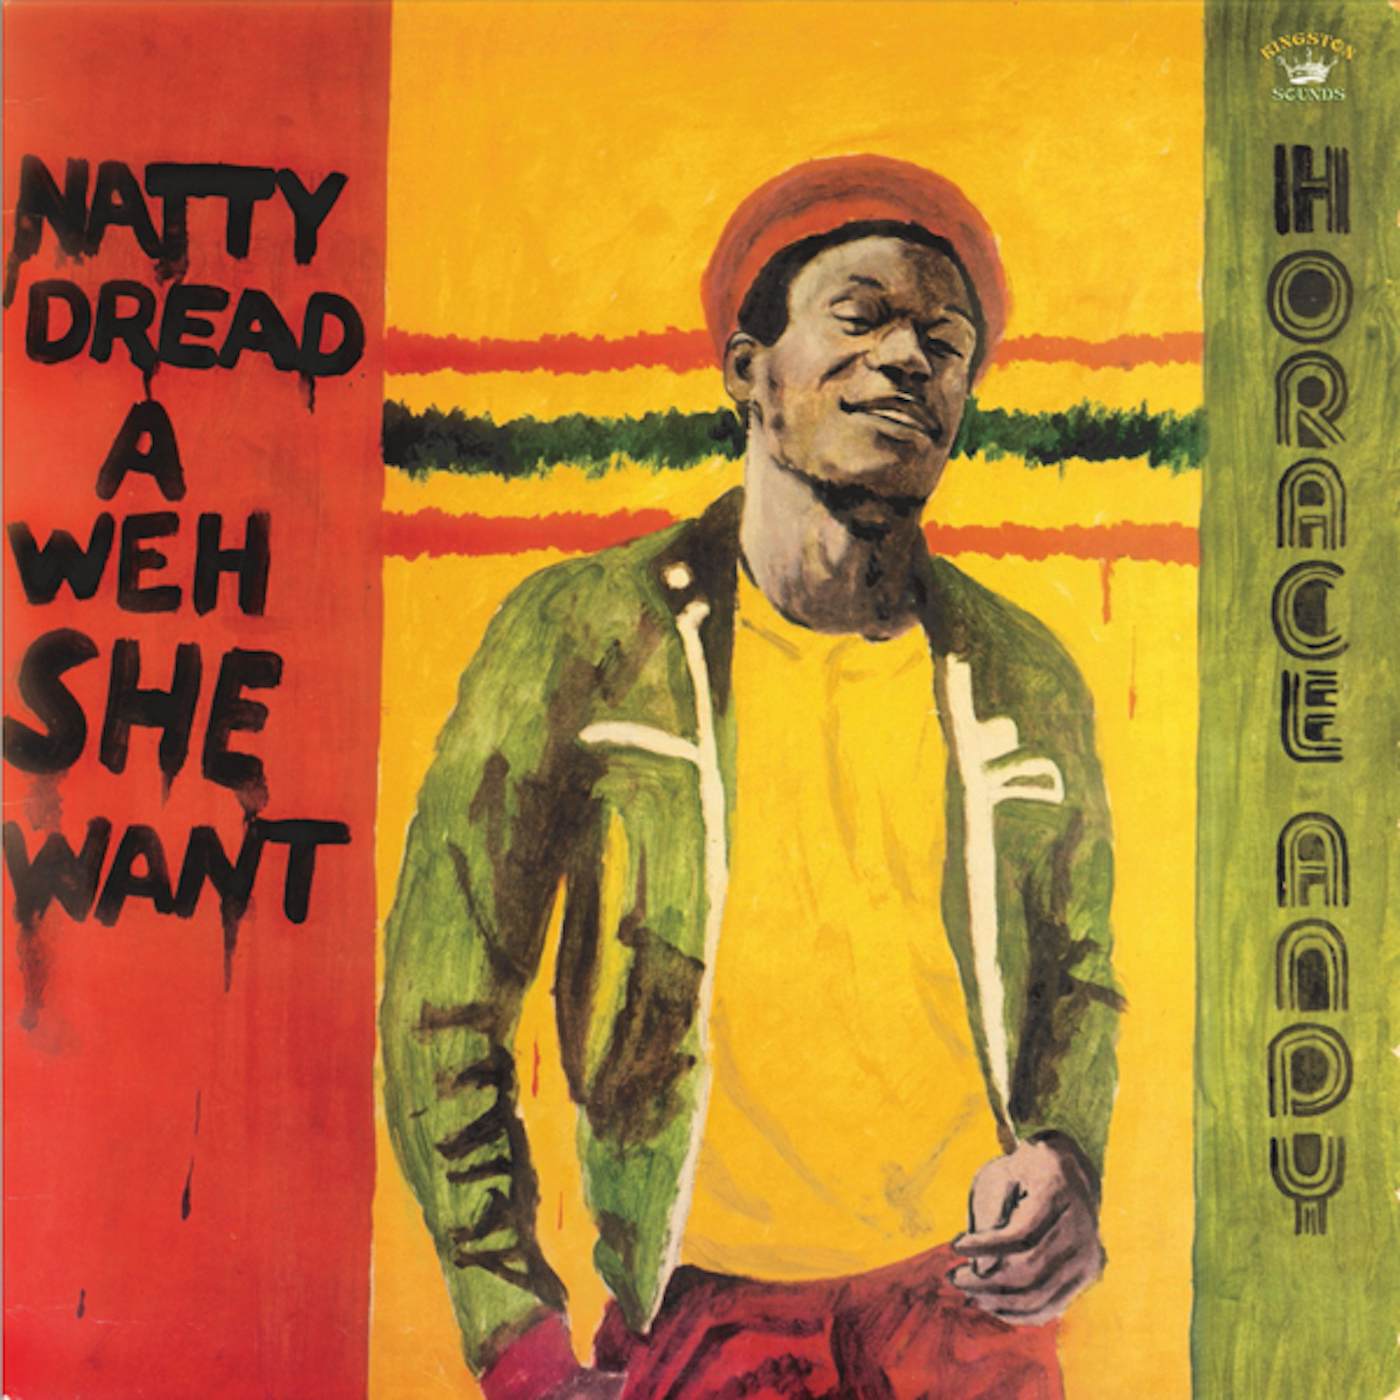 Horace Andy NATTY DREAD A WEH SHE WENT CD